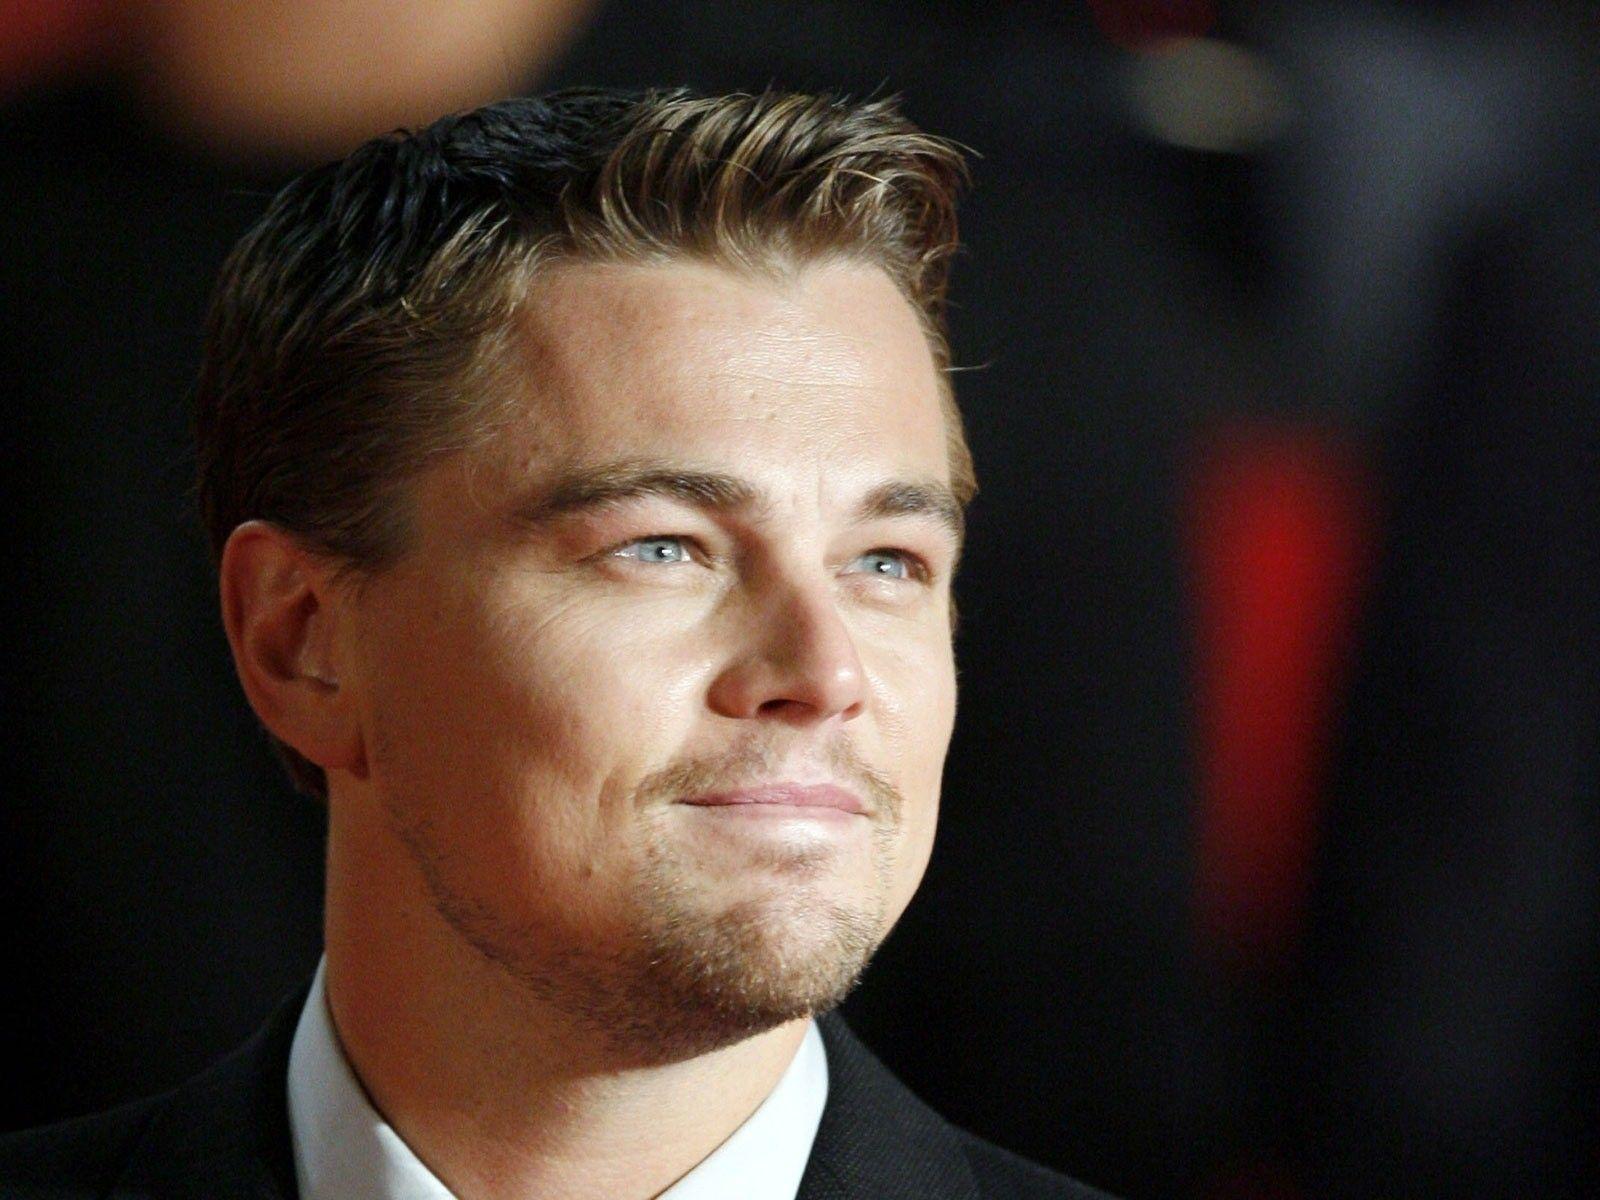 Most Famous HD Wallpaper of Leonardo DiCaprio Hollywood Actor. HD